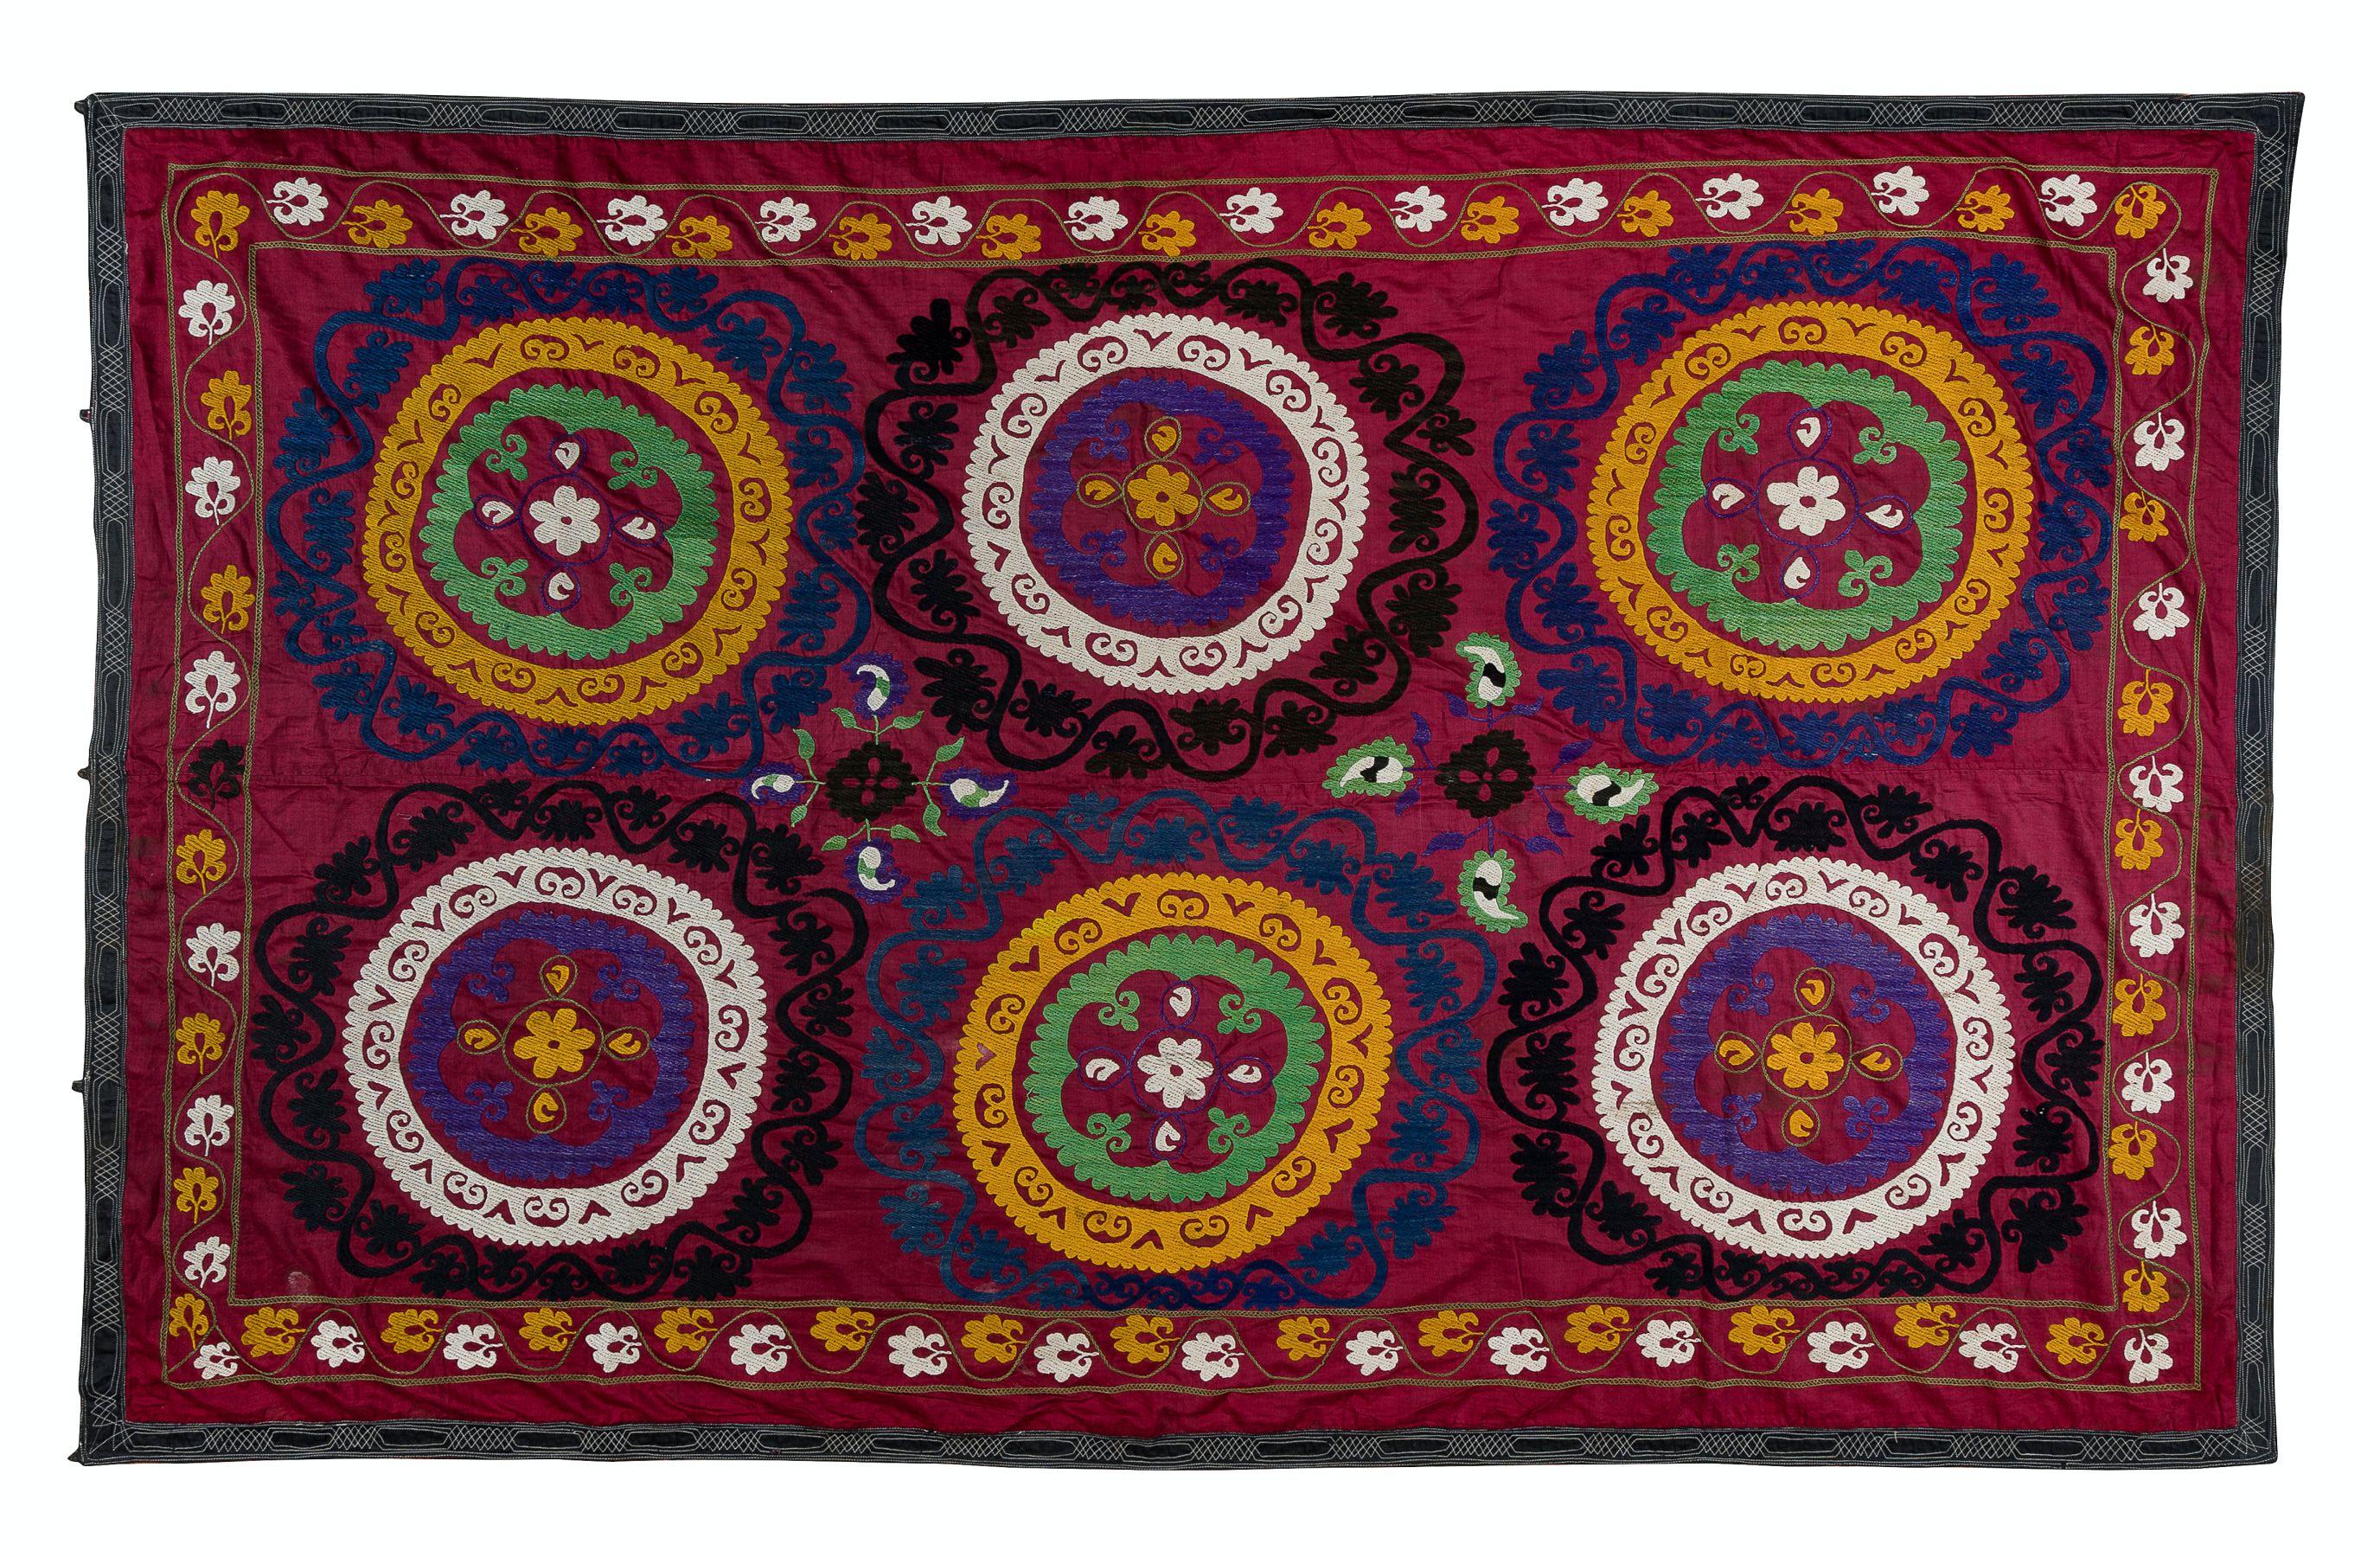 Embroidered 4.8x7.3 Ft Silk Embroidery Wall Hanging, Late-20th Century Uzbek Suzani Throw For Sale